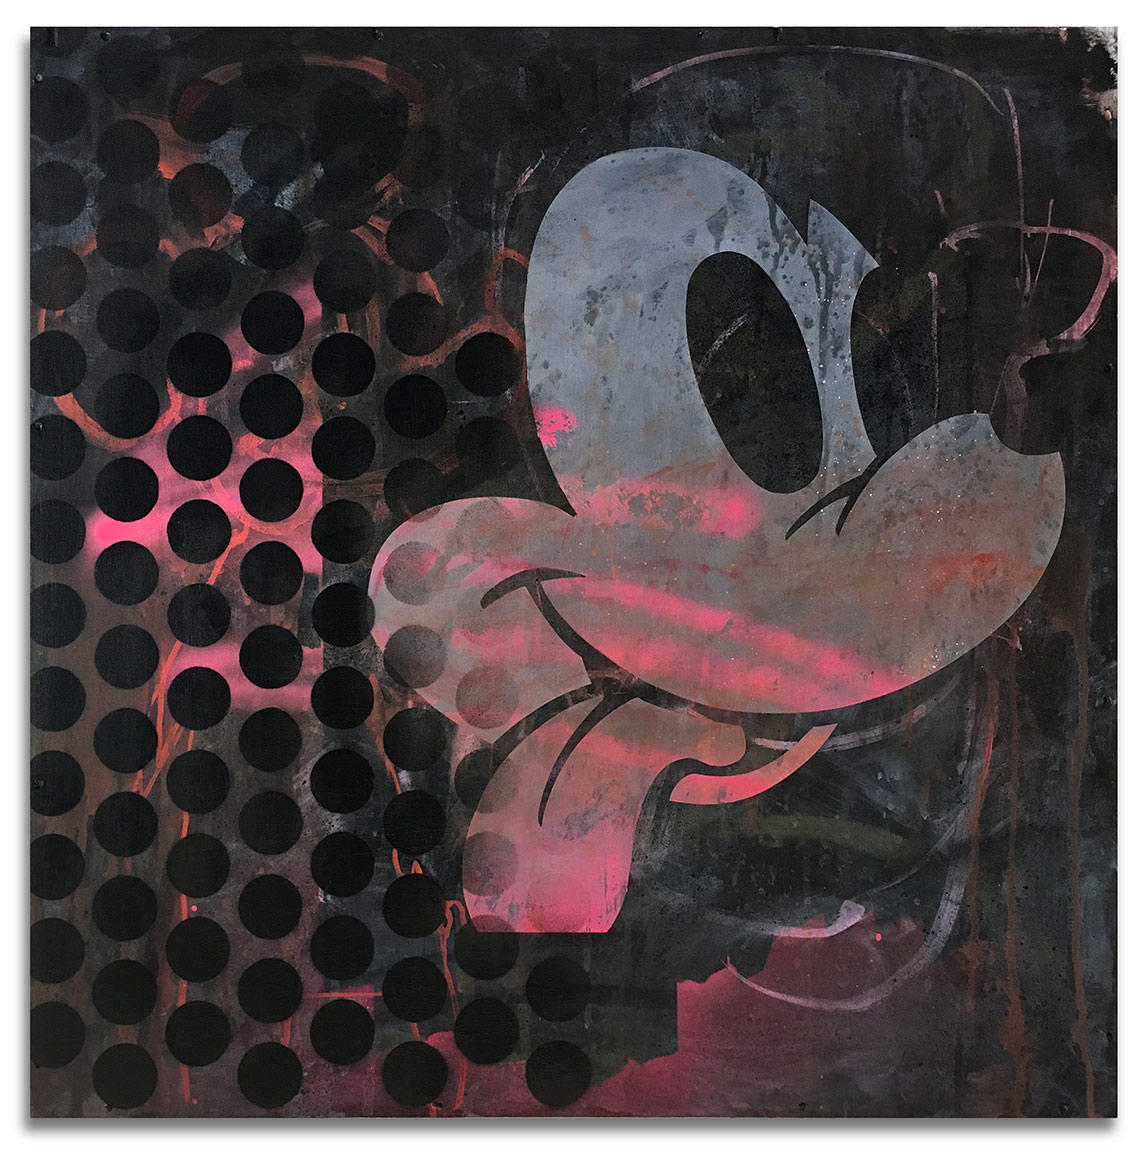 Part Mickey - 29" x 29" Acrylics, spray cans, oil pastel on wood, industrial wire spool box.